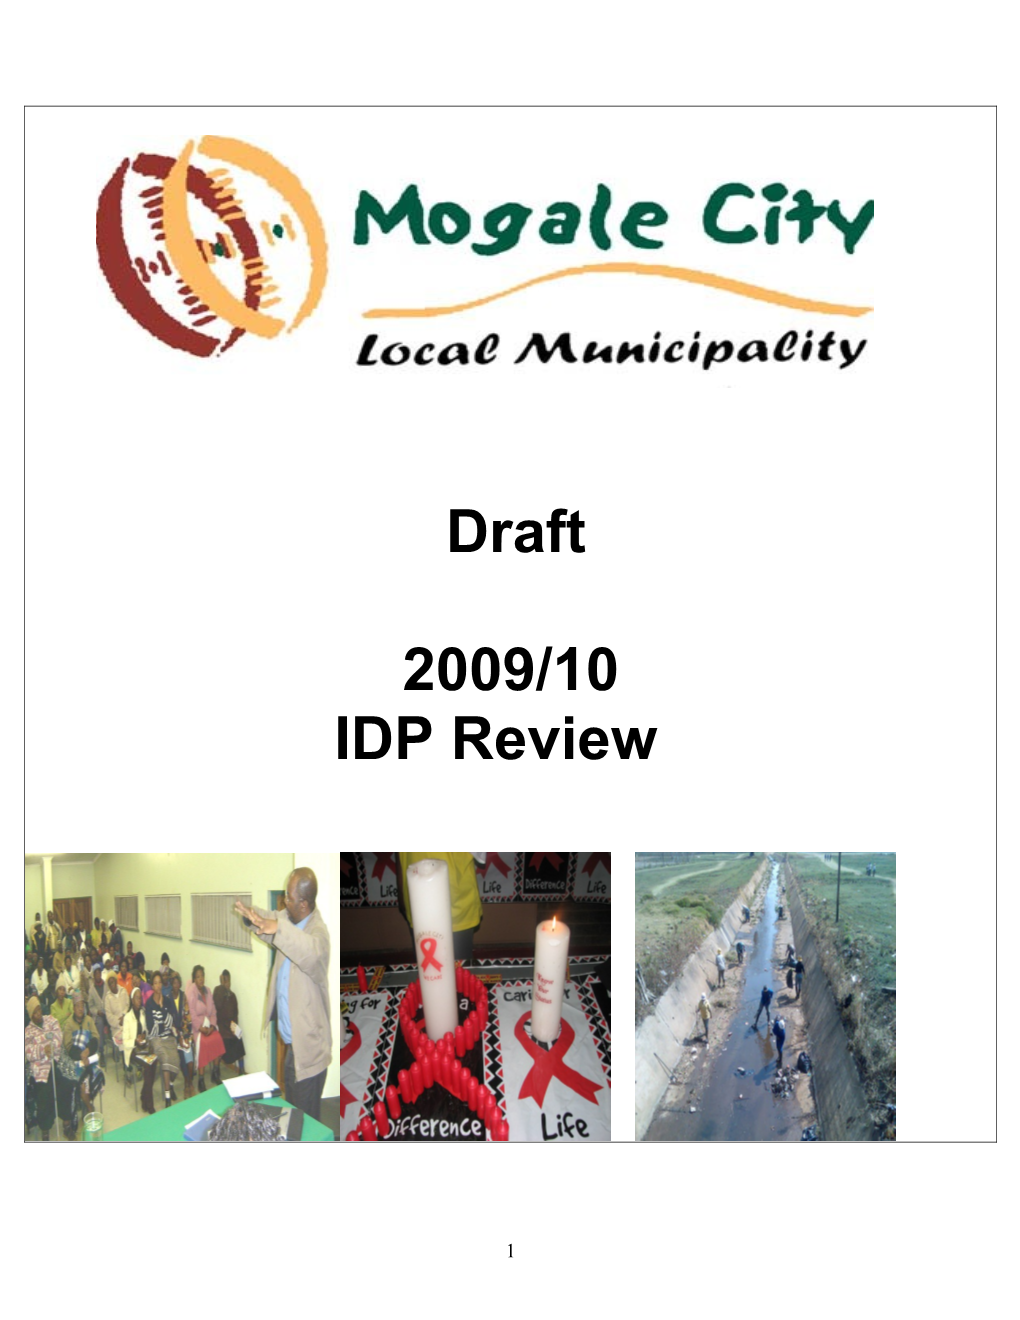 This Is the 3Rd Annual Review of the 5 Years Integrated Development Plan (IDP) of Mogale